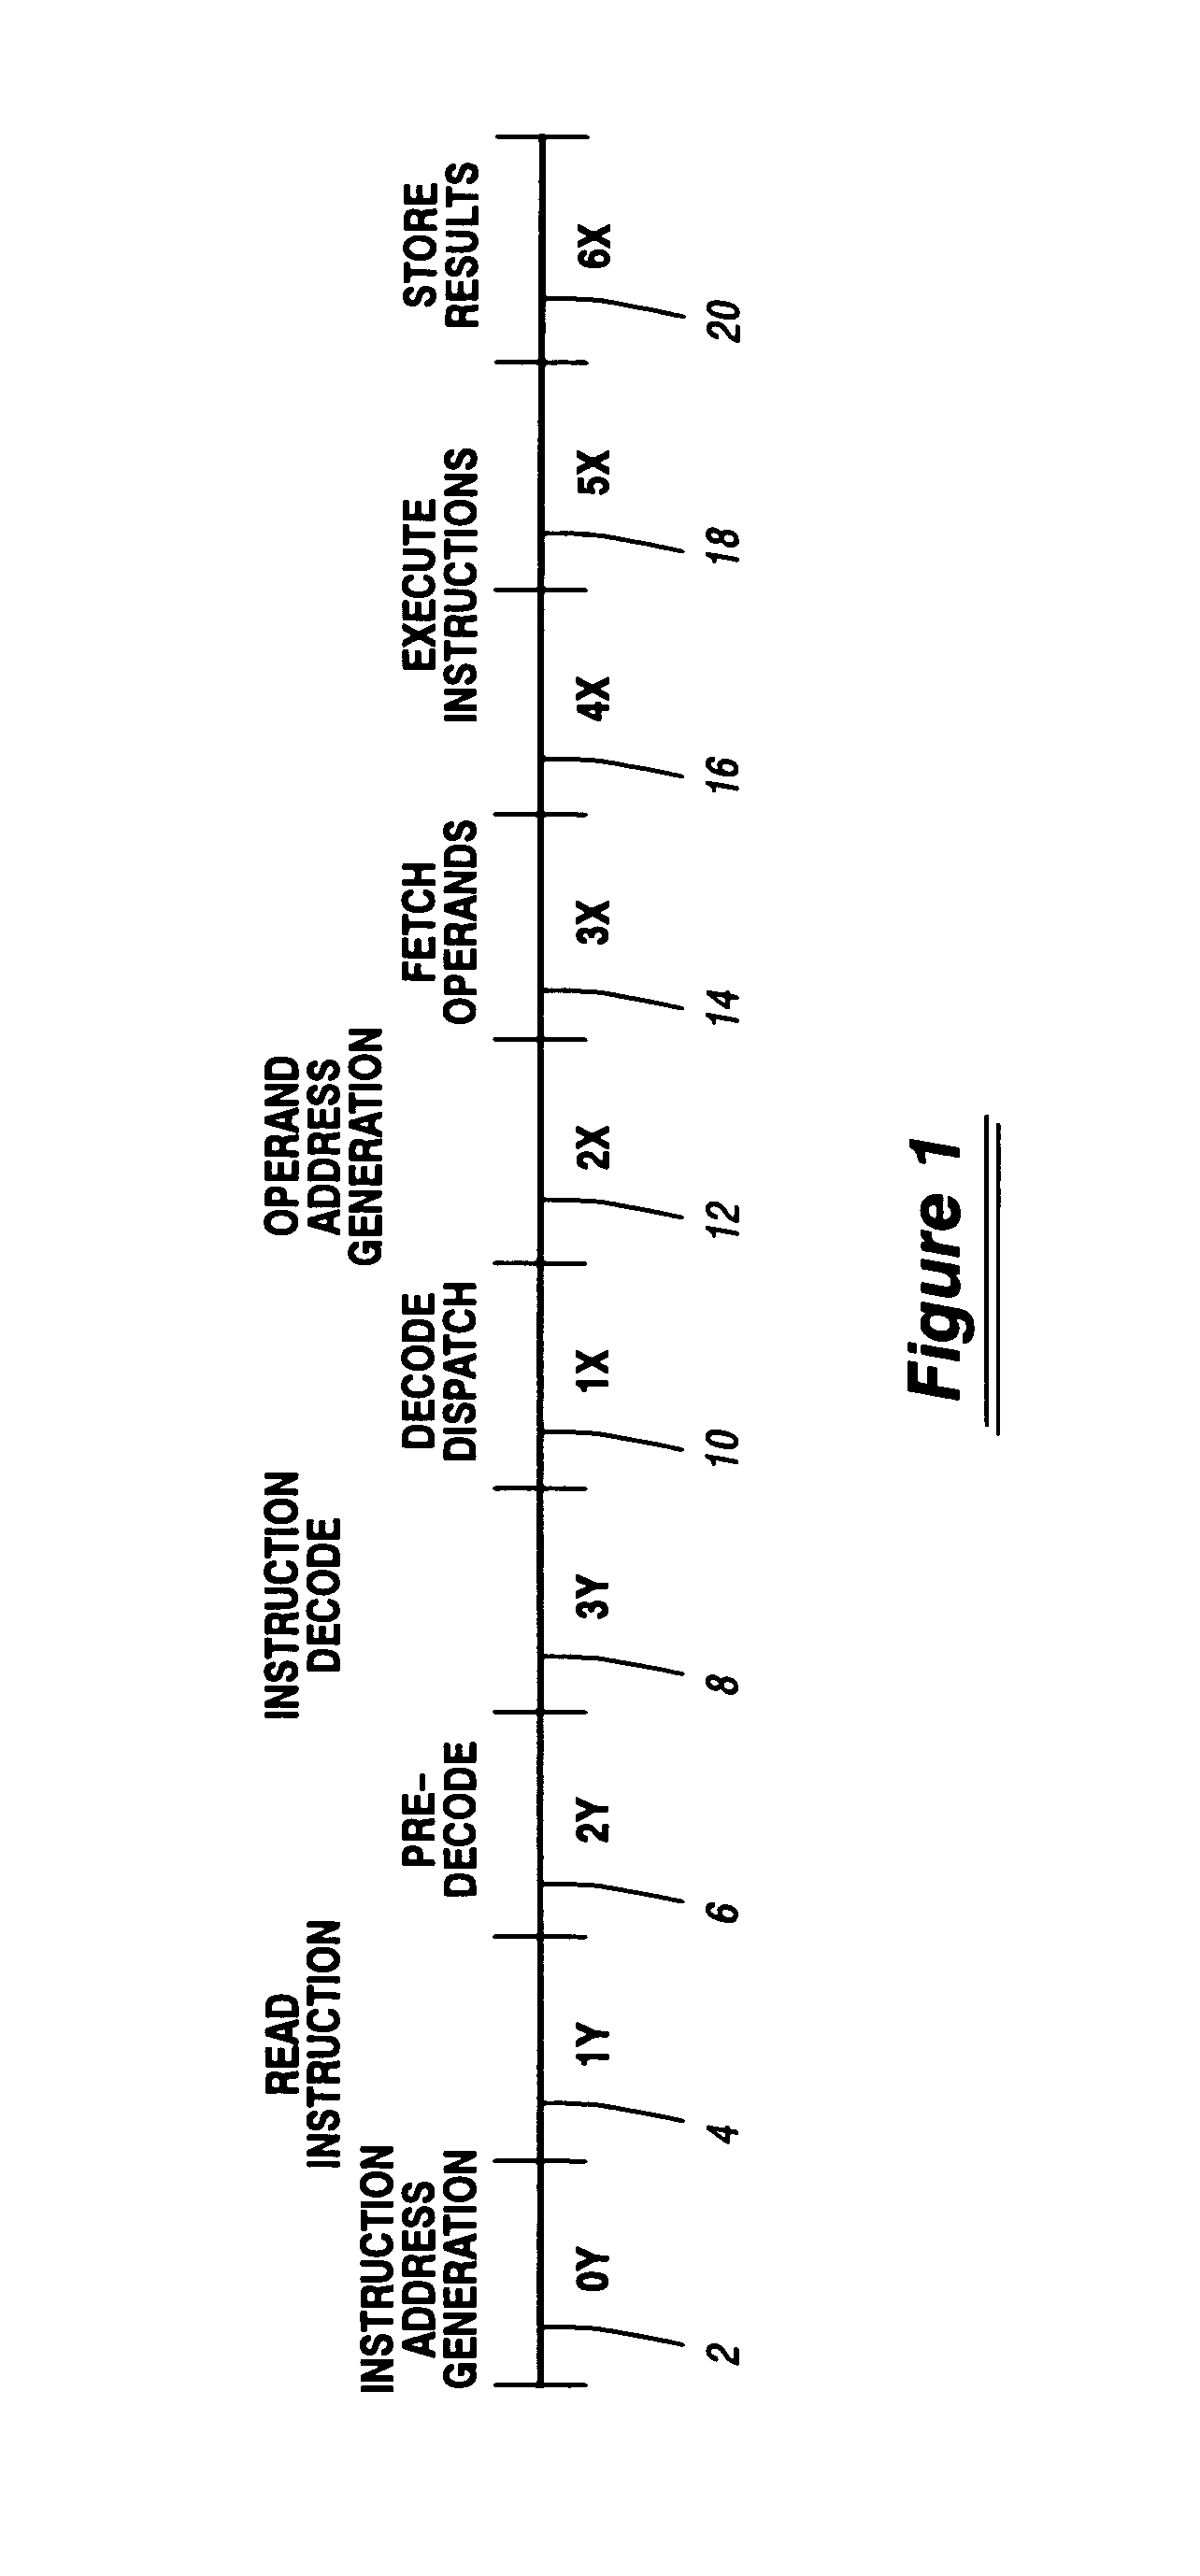 Pipeline controller for providing independent execution between the preliminary and advanced stages of a synchronous pipeline